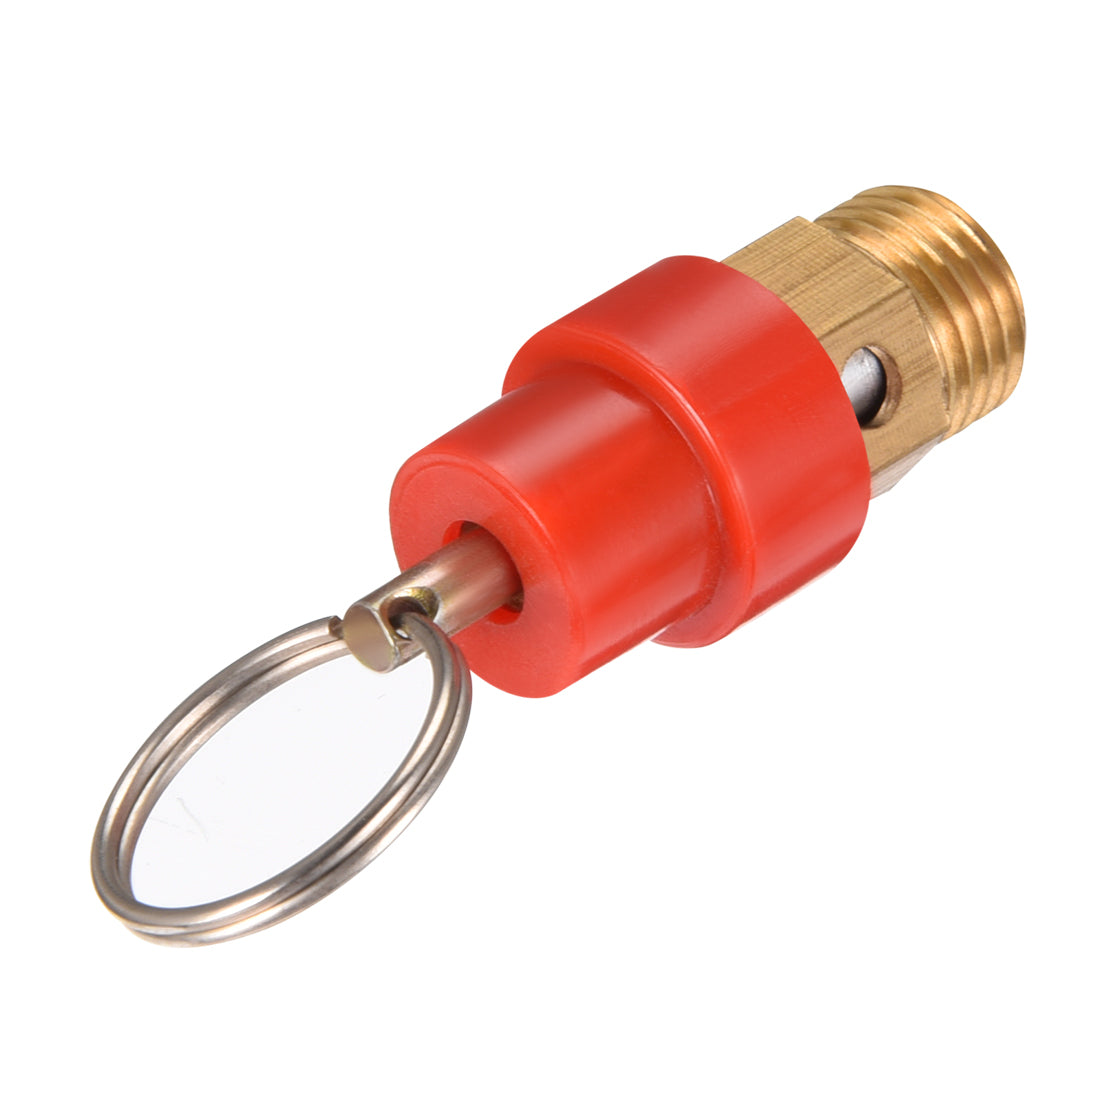 uxcell Uxcell 1/4 BSP Thread Pressure Relief Valve for Air Compressor 0.6Mpa Red Gold Tone w Split Ring 2 pcs